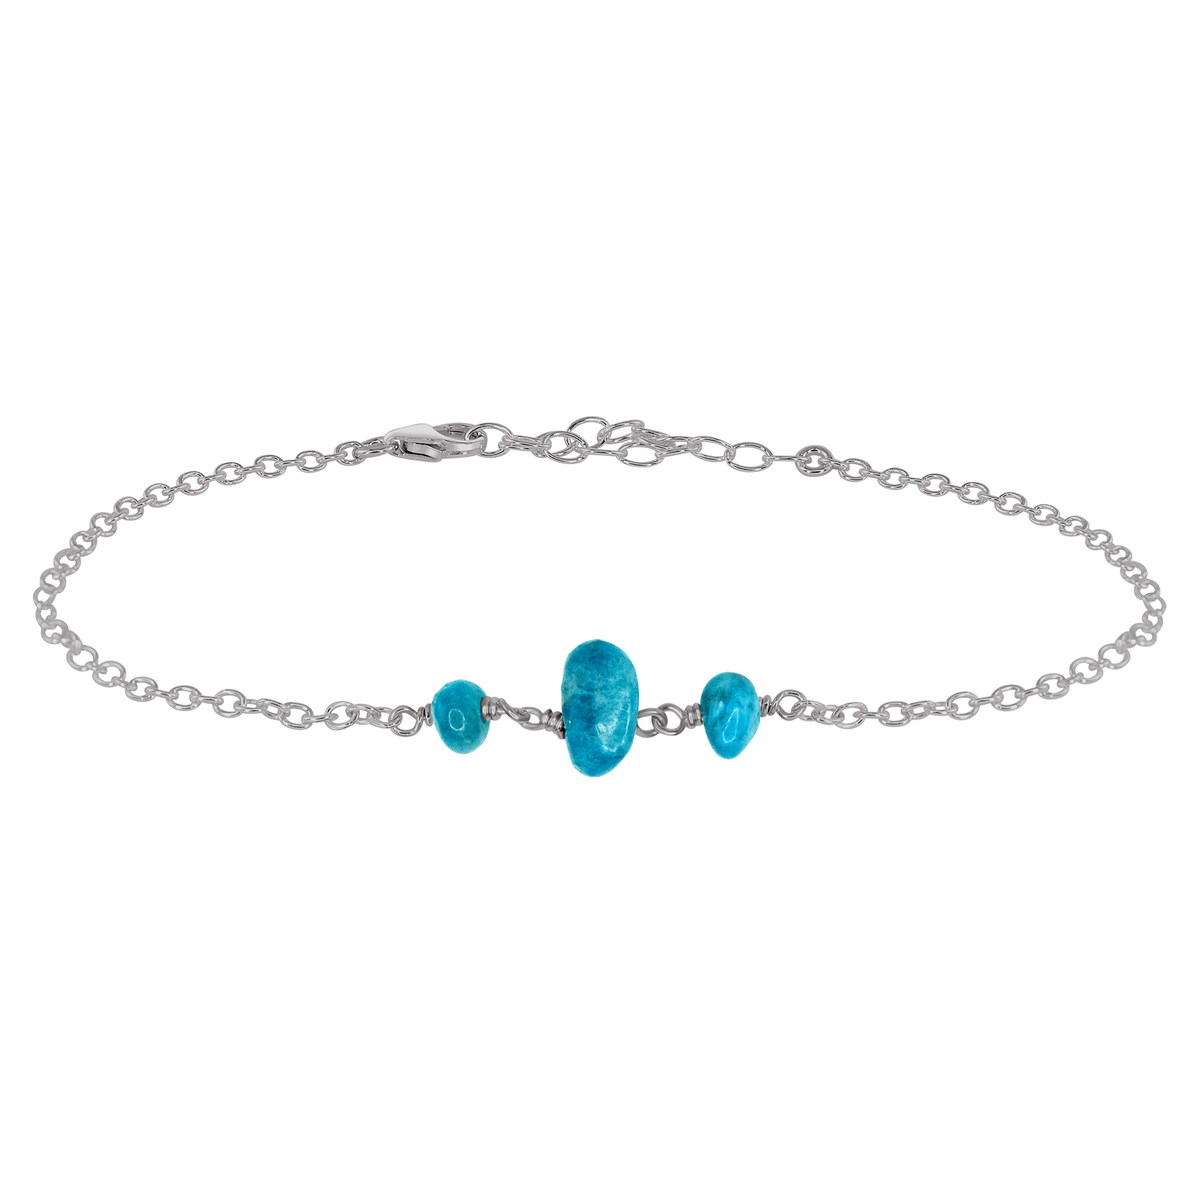 Beaded Chain Anklet - Apatite - Stainless Steel - Luna Tide Handmade Jewellery